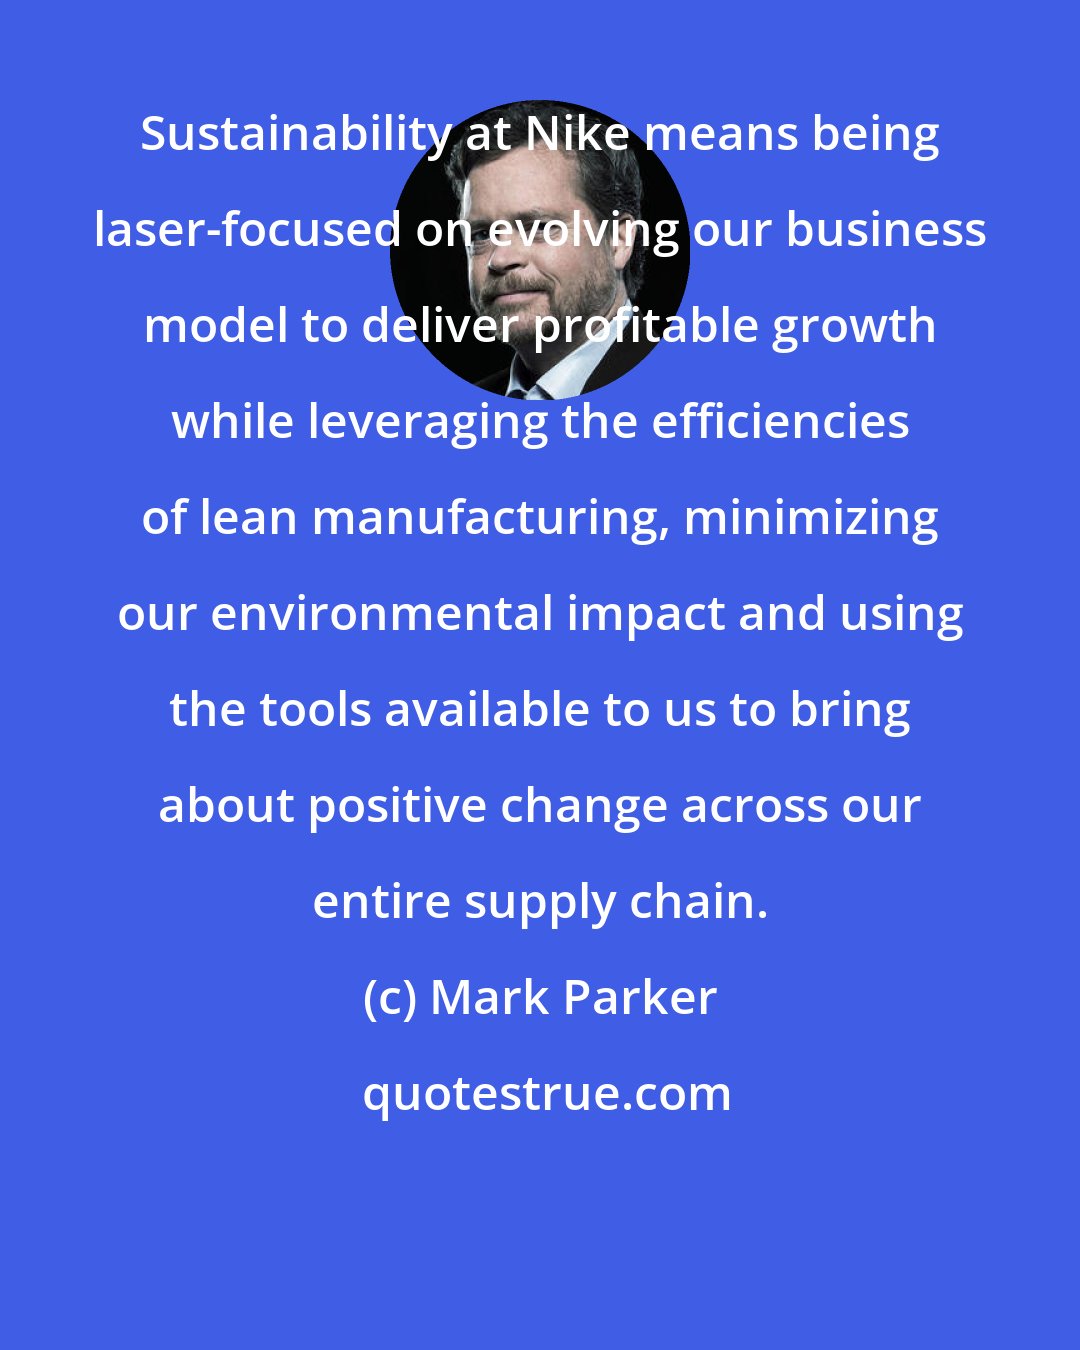 Mark Parker: Sustainability at Nike means being laser-focused on evolving our business model to deliver profitable growth while leveraging the efficiencies of lean manufacturing, minimizing our environmental impact and using the tools available to us to bring about positive change across our entire supply chain.